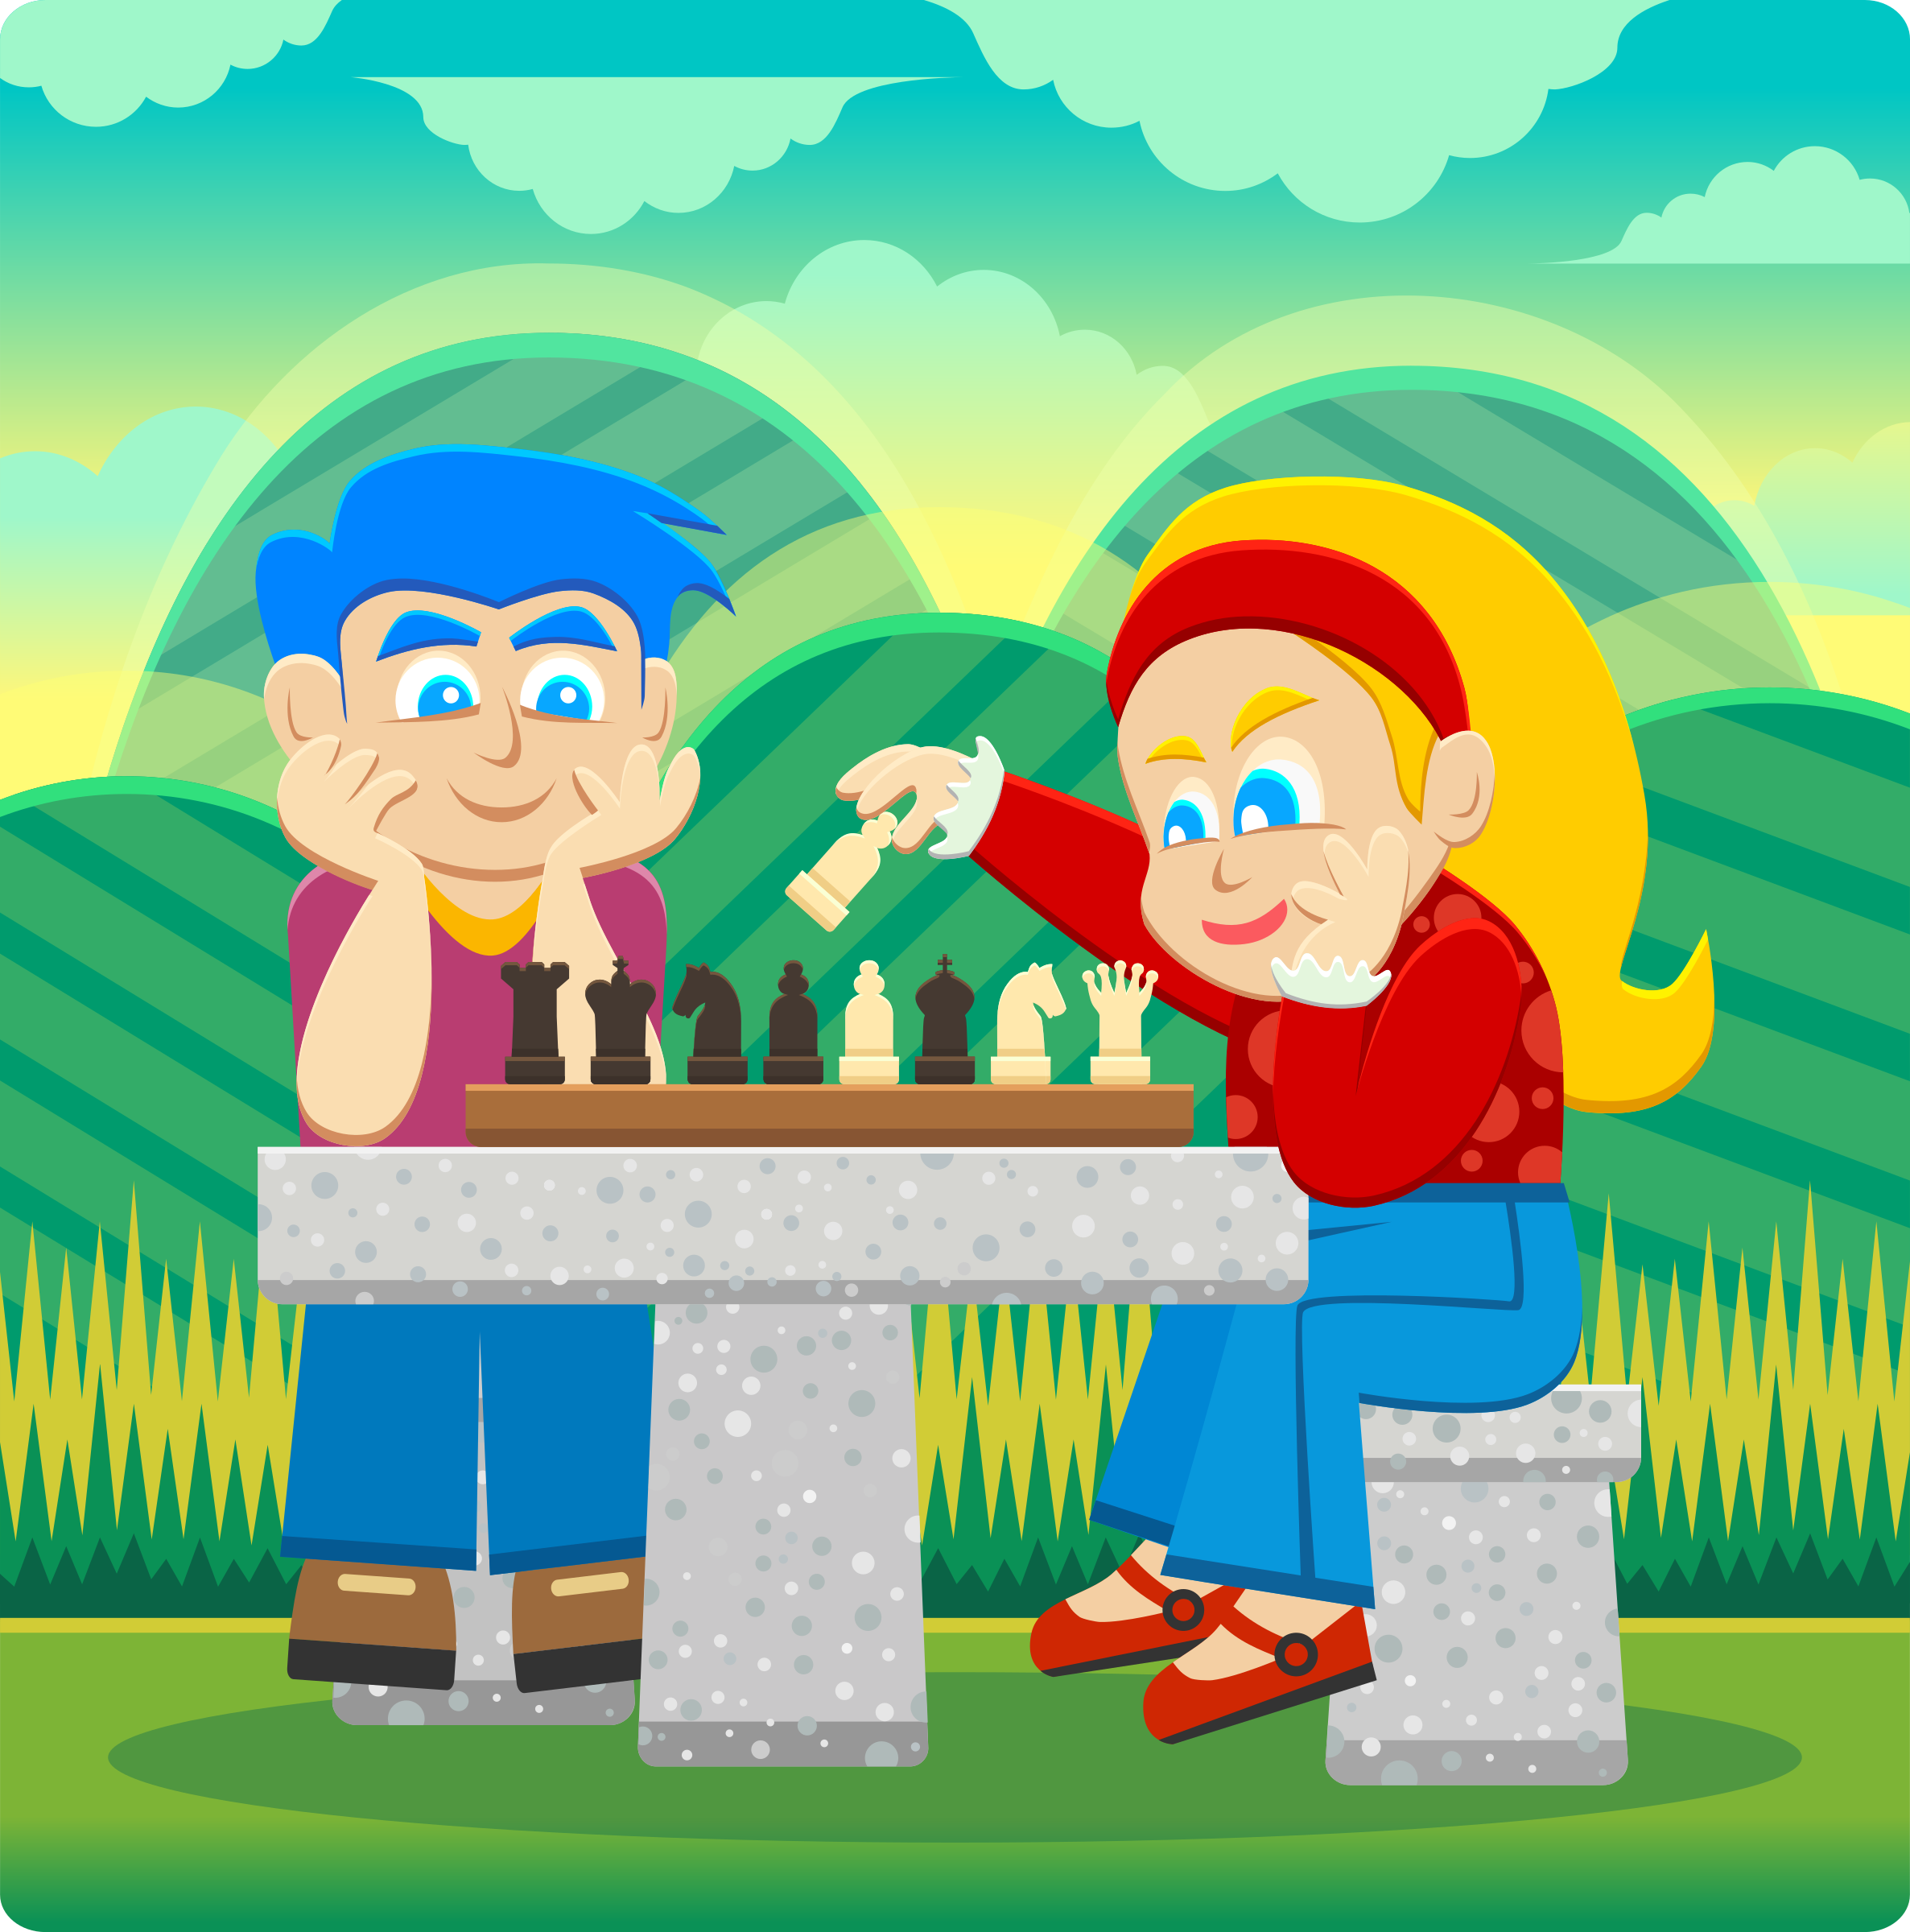 How chess helped a first-grader learn patience and strategy – Daily Breeze